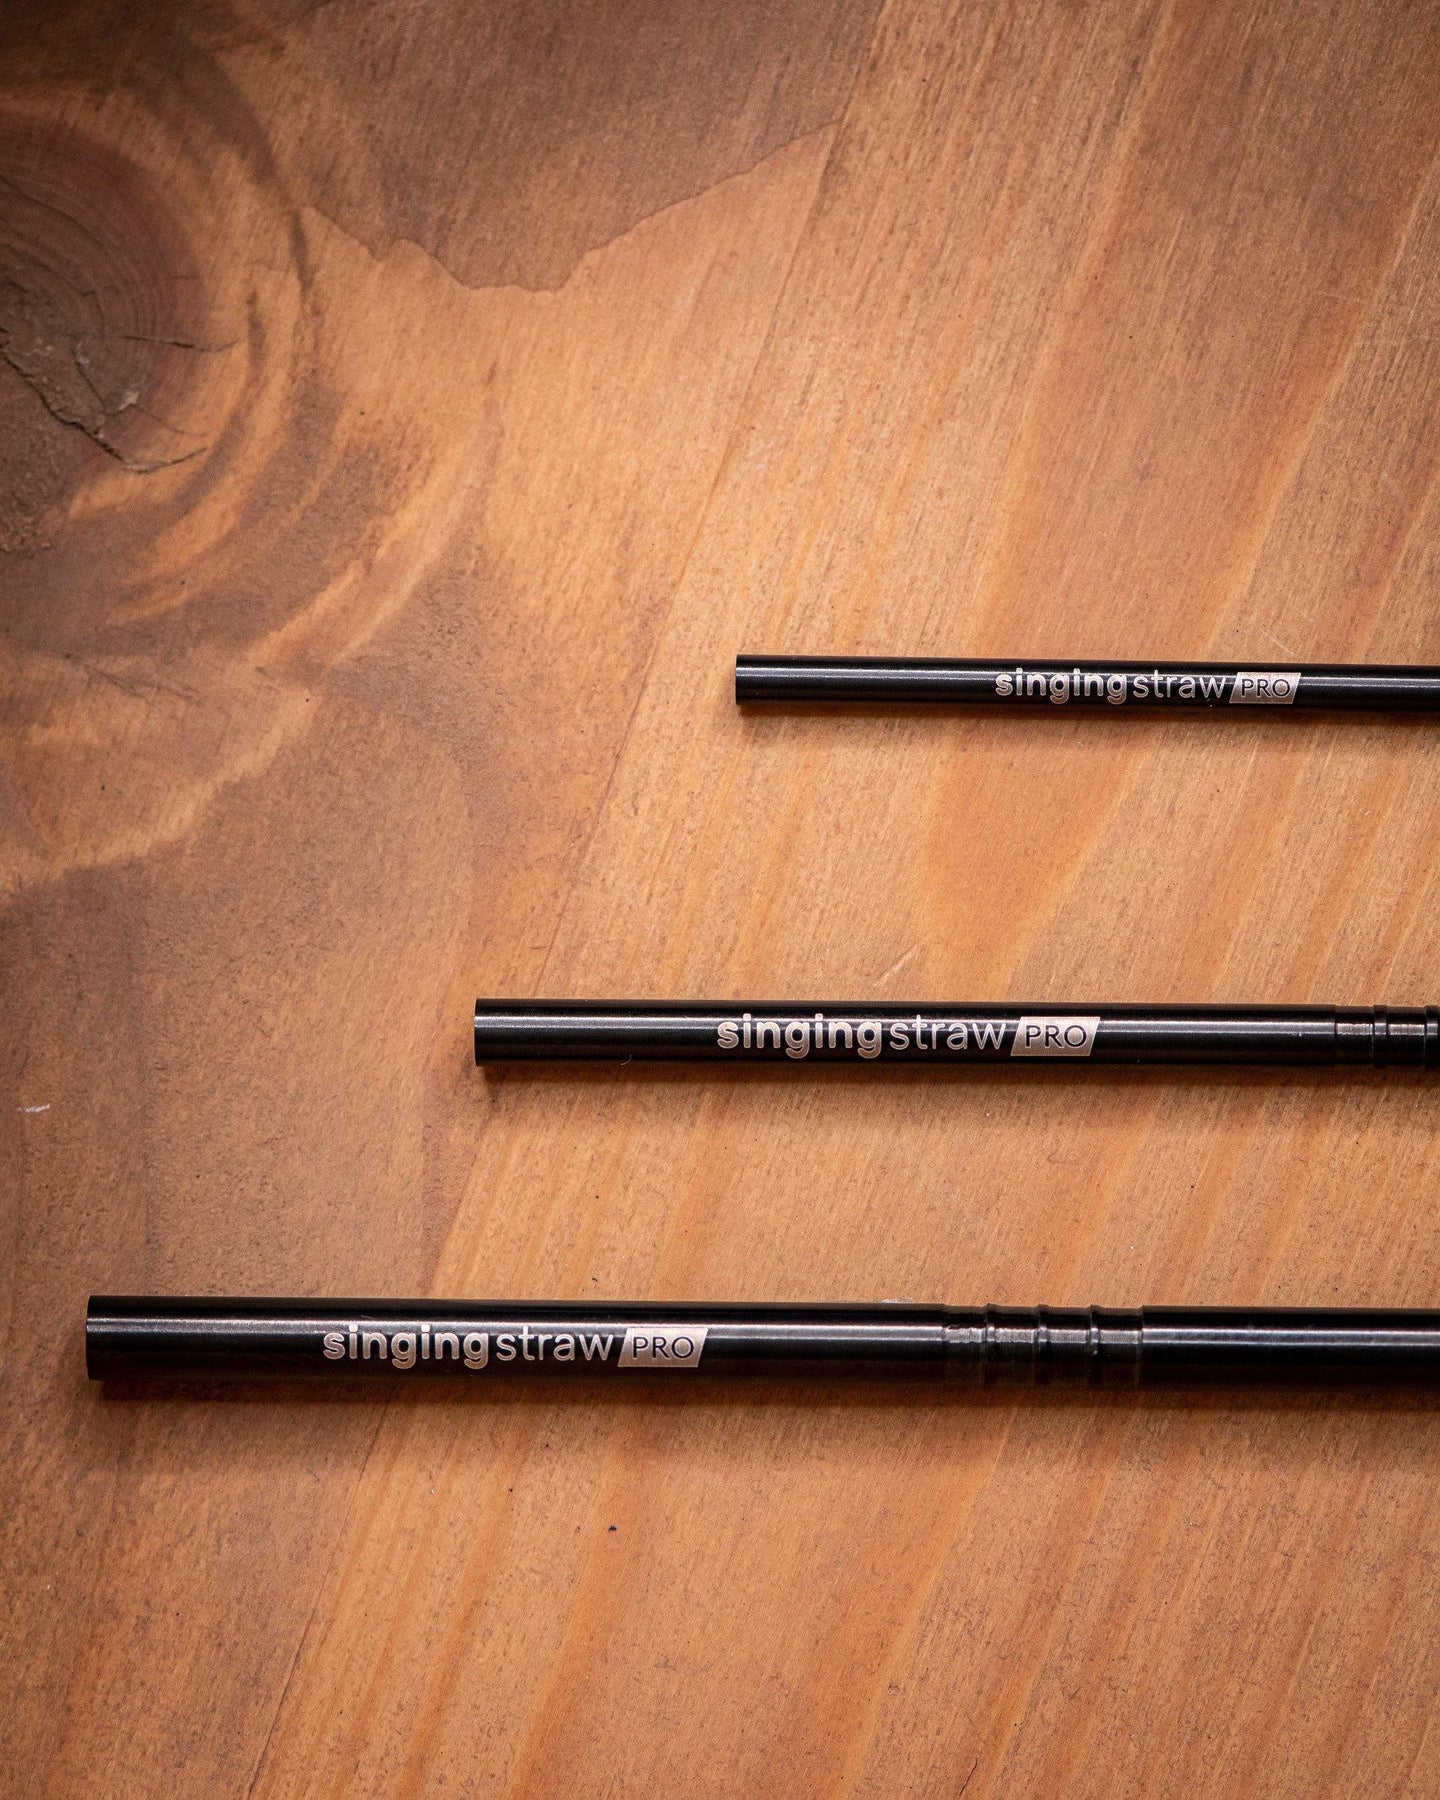 Singing / Straw PRO stainless steel vocal straw helps singers work out  their voices » Gadget Flow